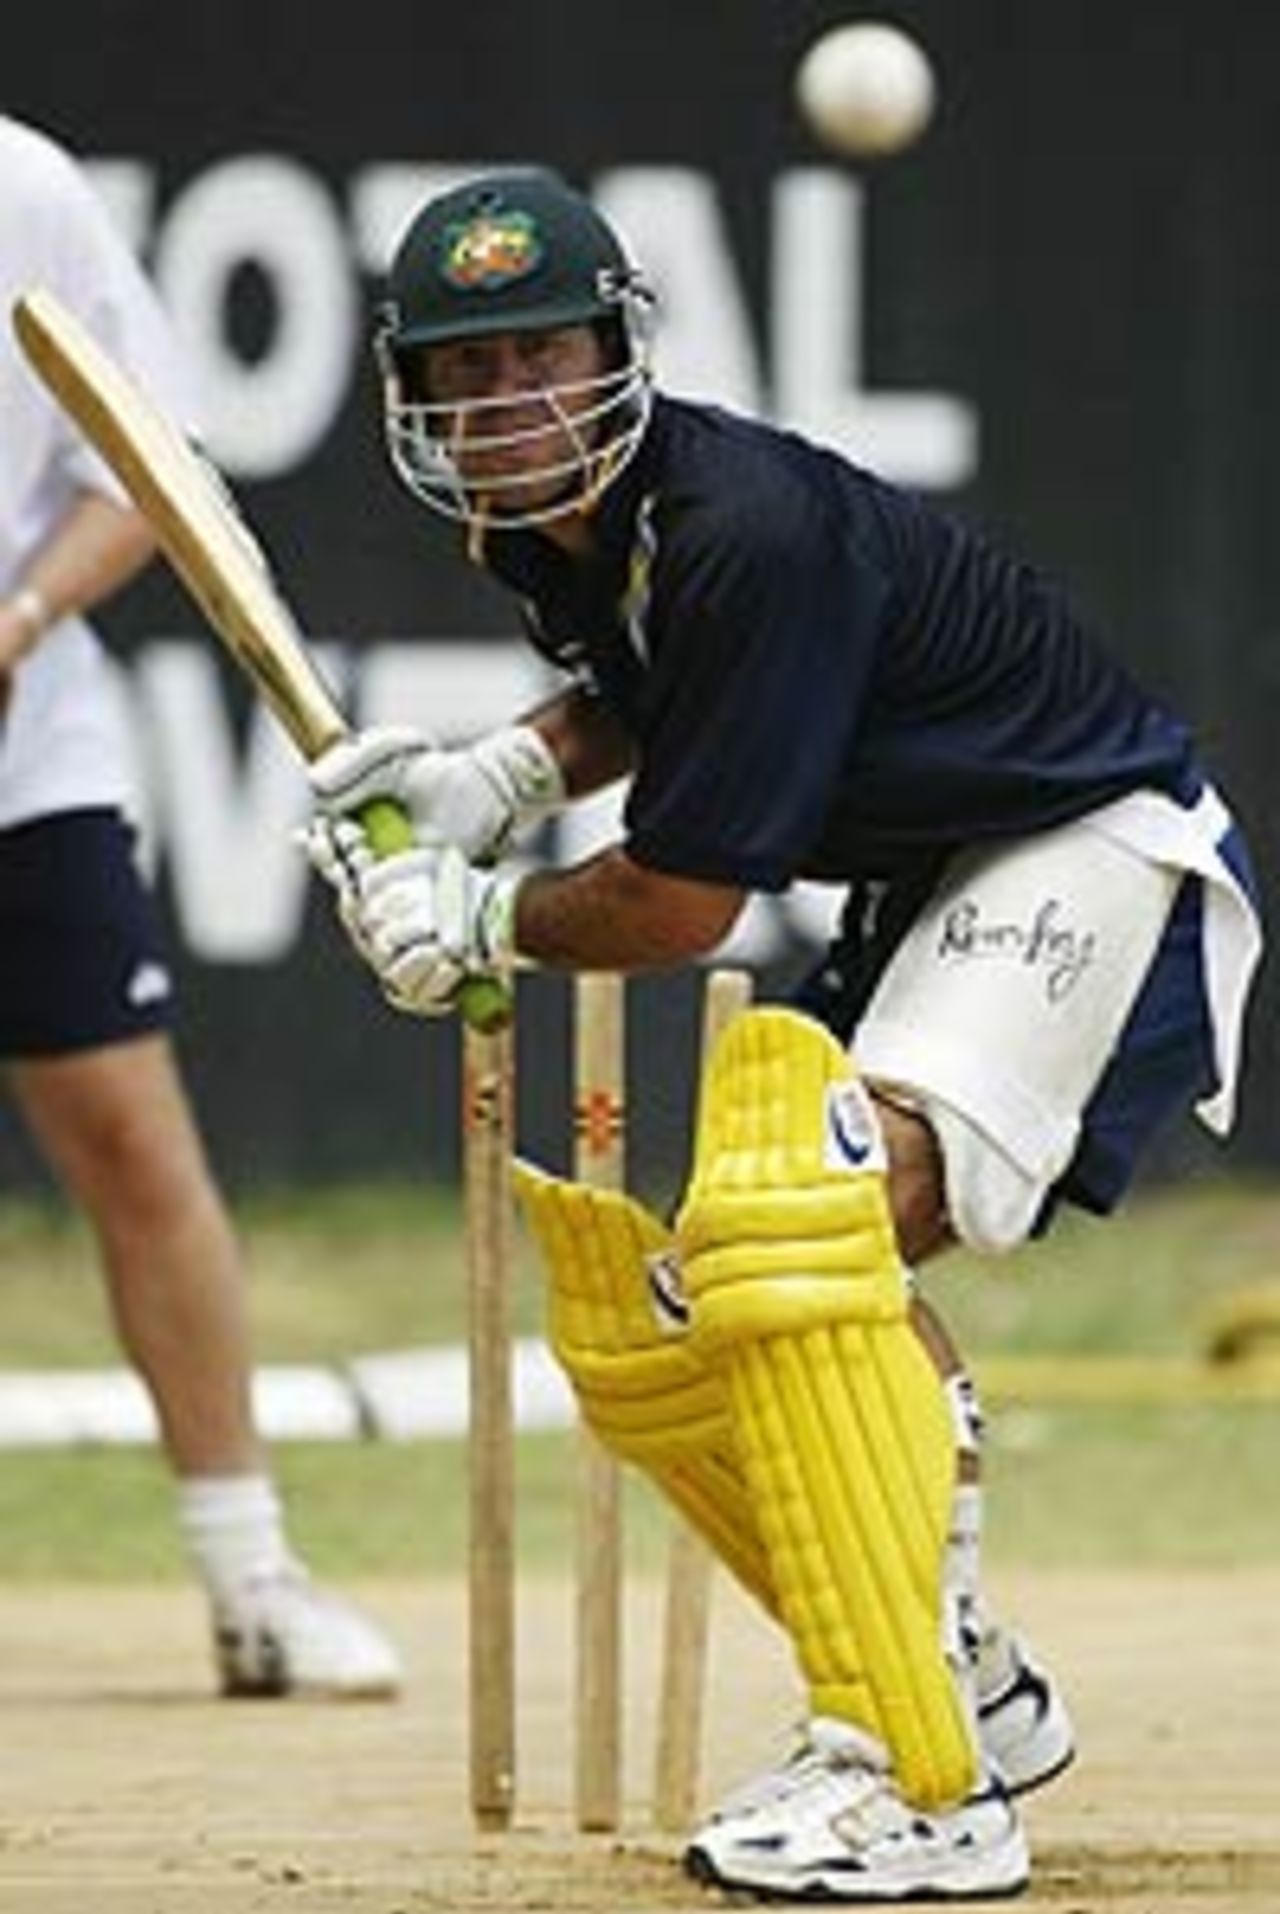 Ricky Ponting practises ahead of the first ODI in Jamaica, May 16, 2003